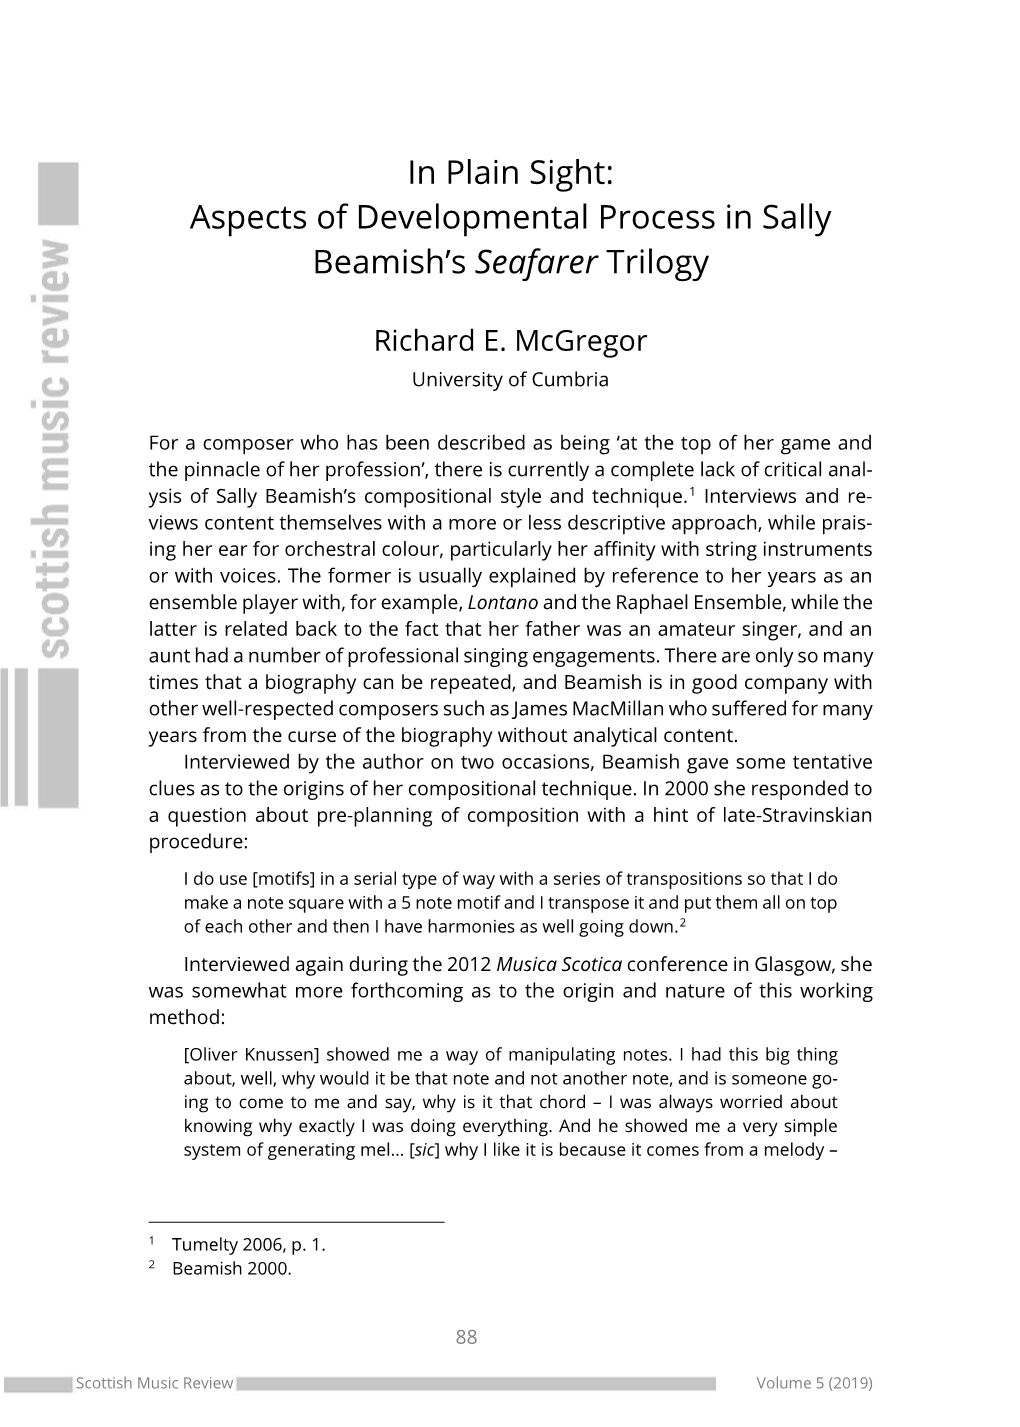 In Plain Sight: Aspects of Developmental Process in Sally Beamish’S Seafarer Trilogy